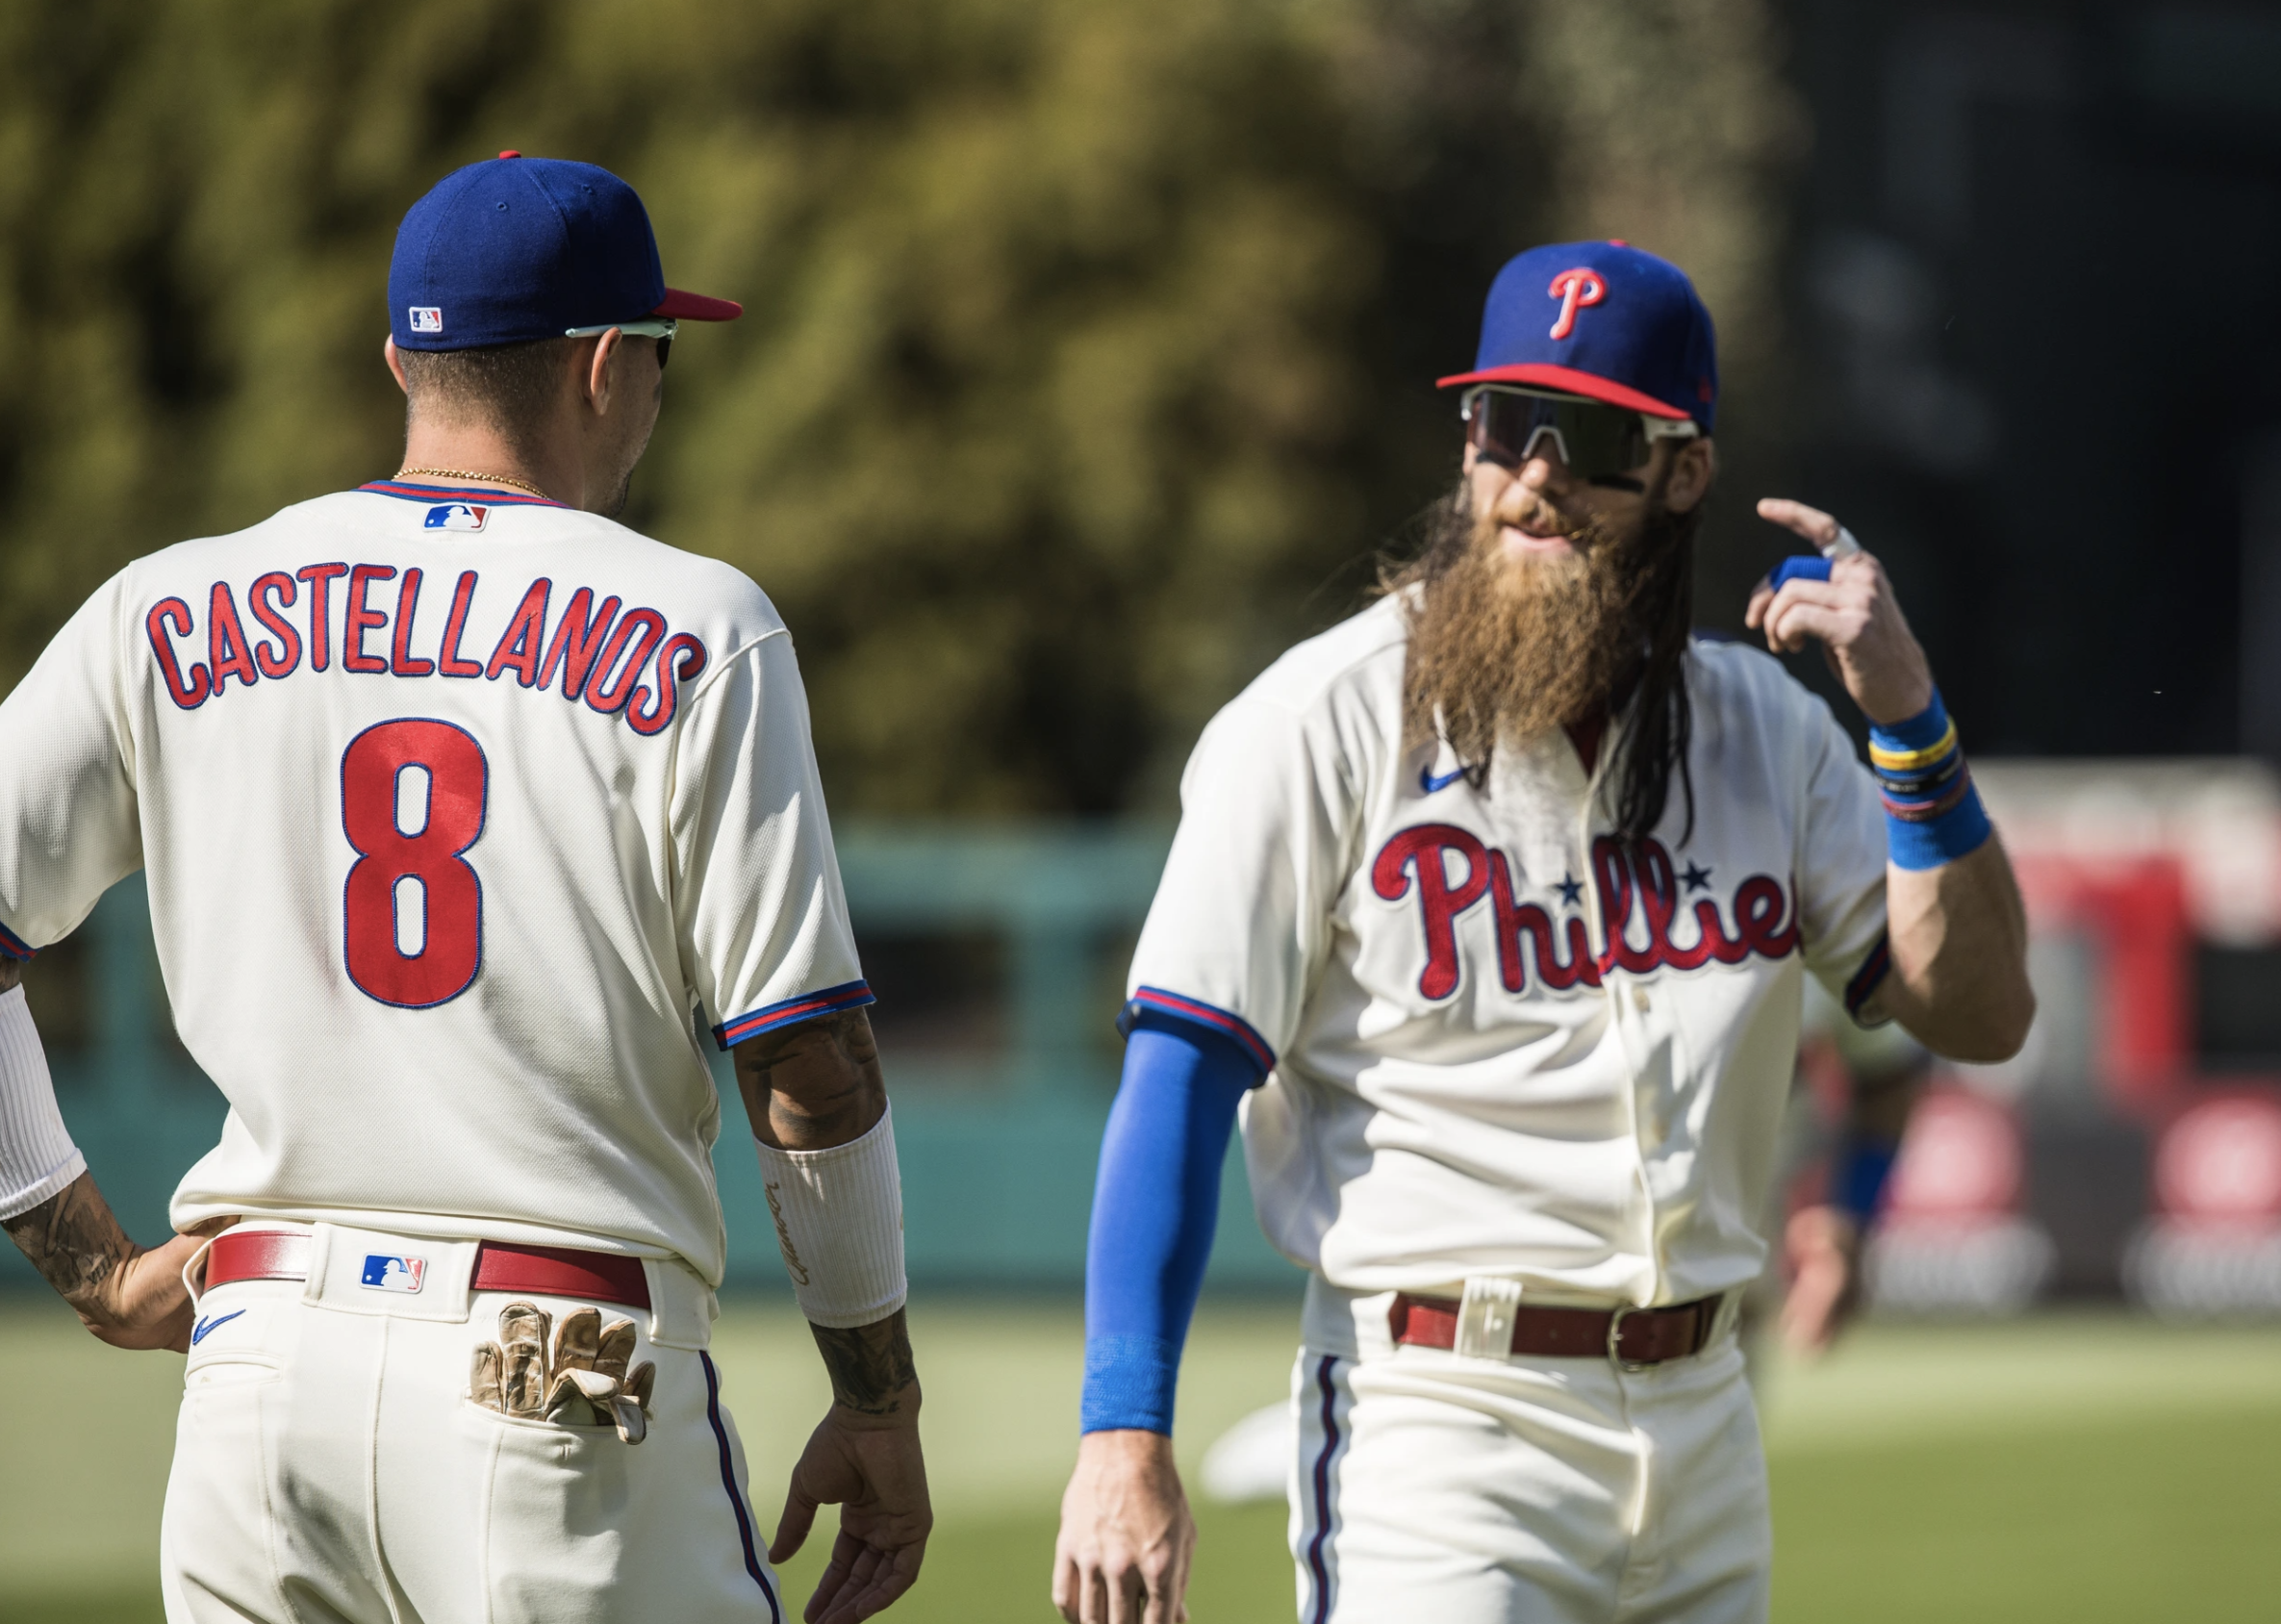 Phillies Nuggets: Is Aaron Nola having a better season than Roy Halladay's  2010 season?  Phillies Nation - Your source for Philadelphia Phillies  news, opinion, history, rumors, events, and other fun stuff.